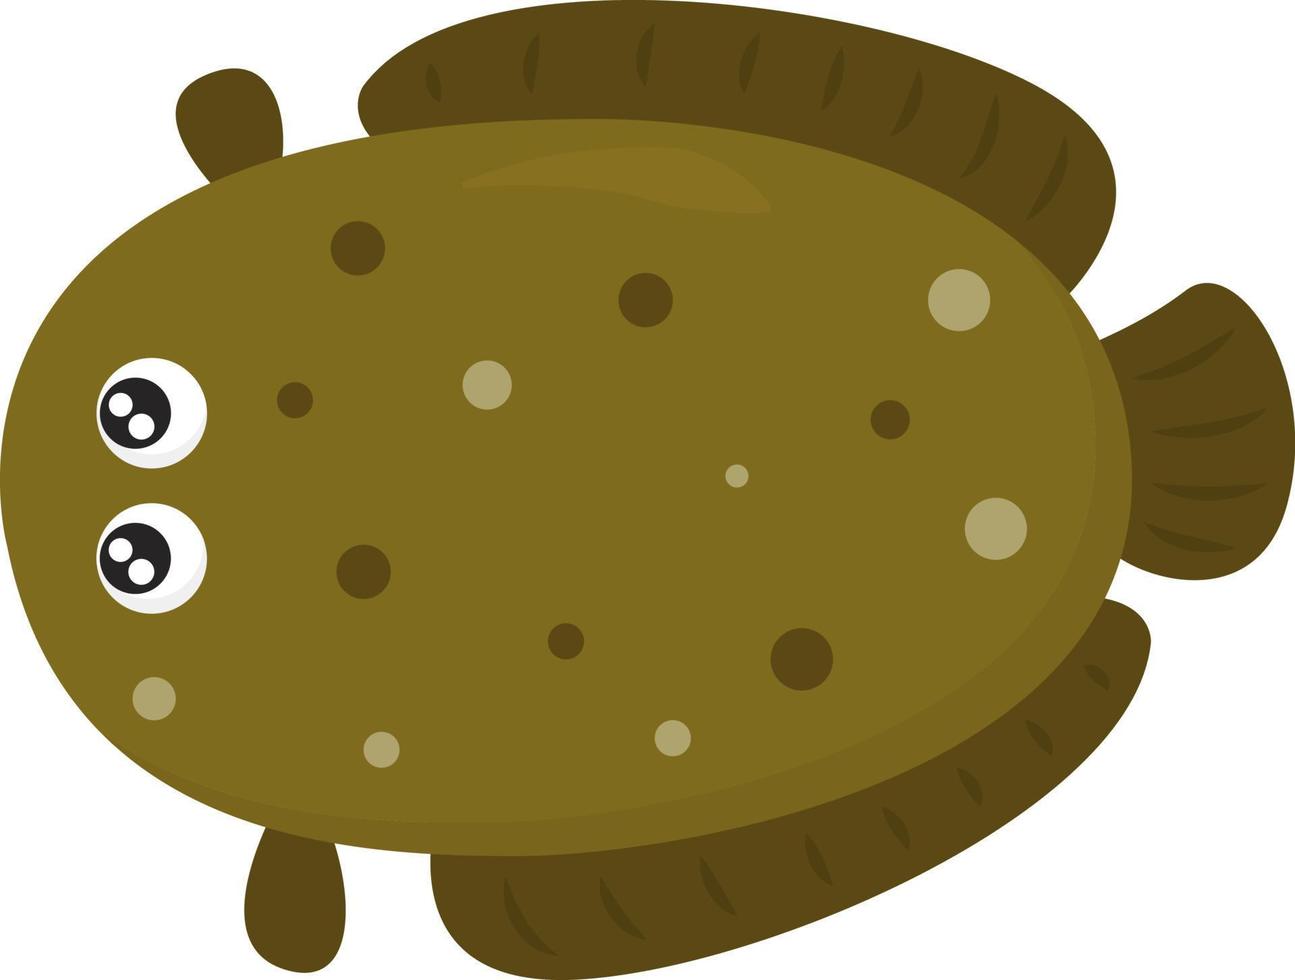 Big brown fish , illustration, vector on white background